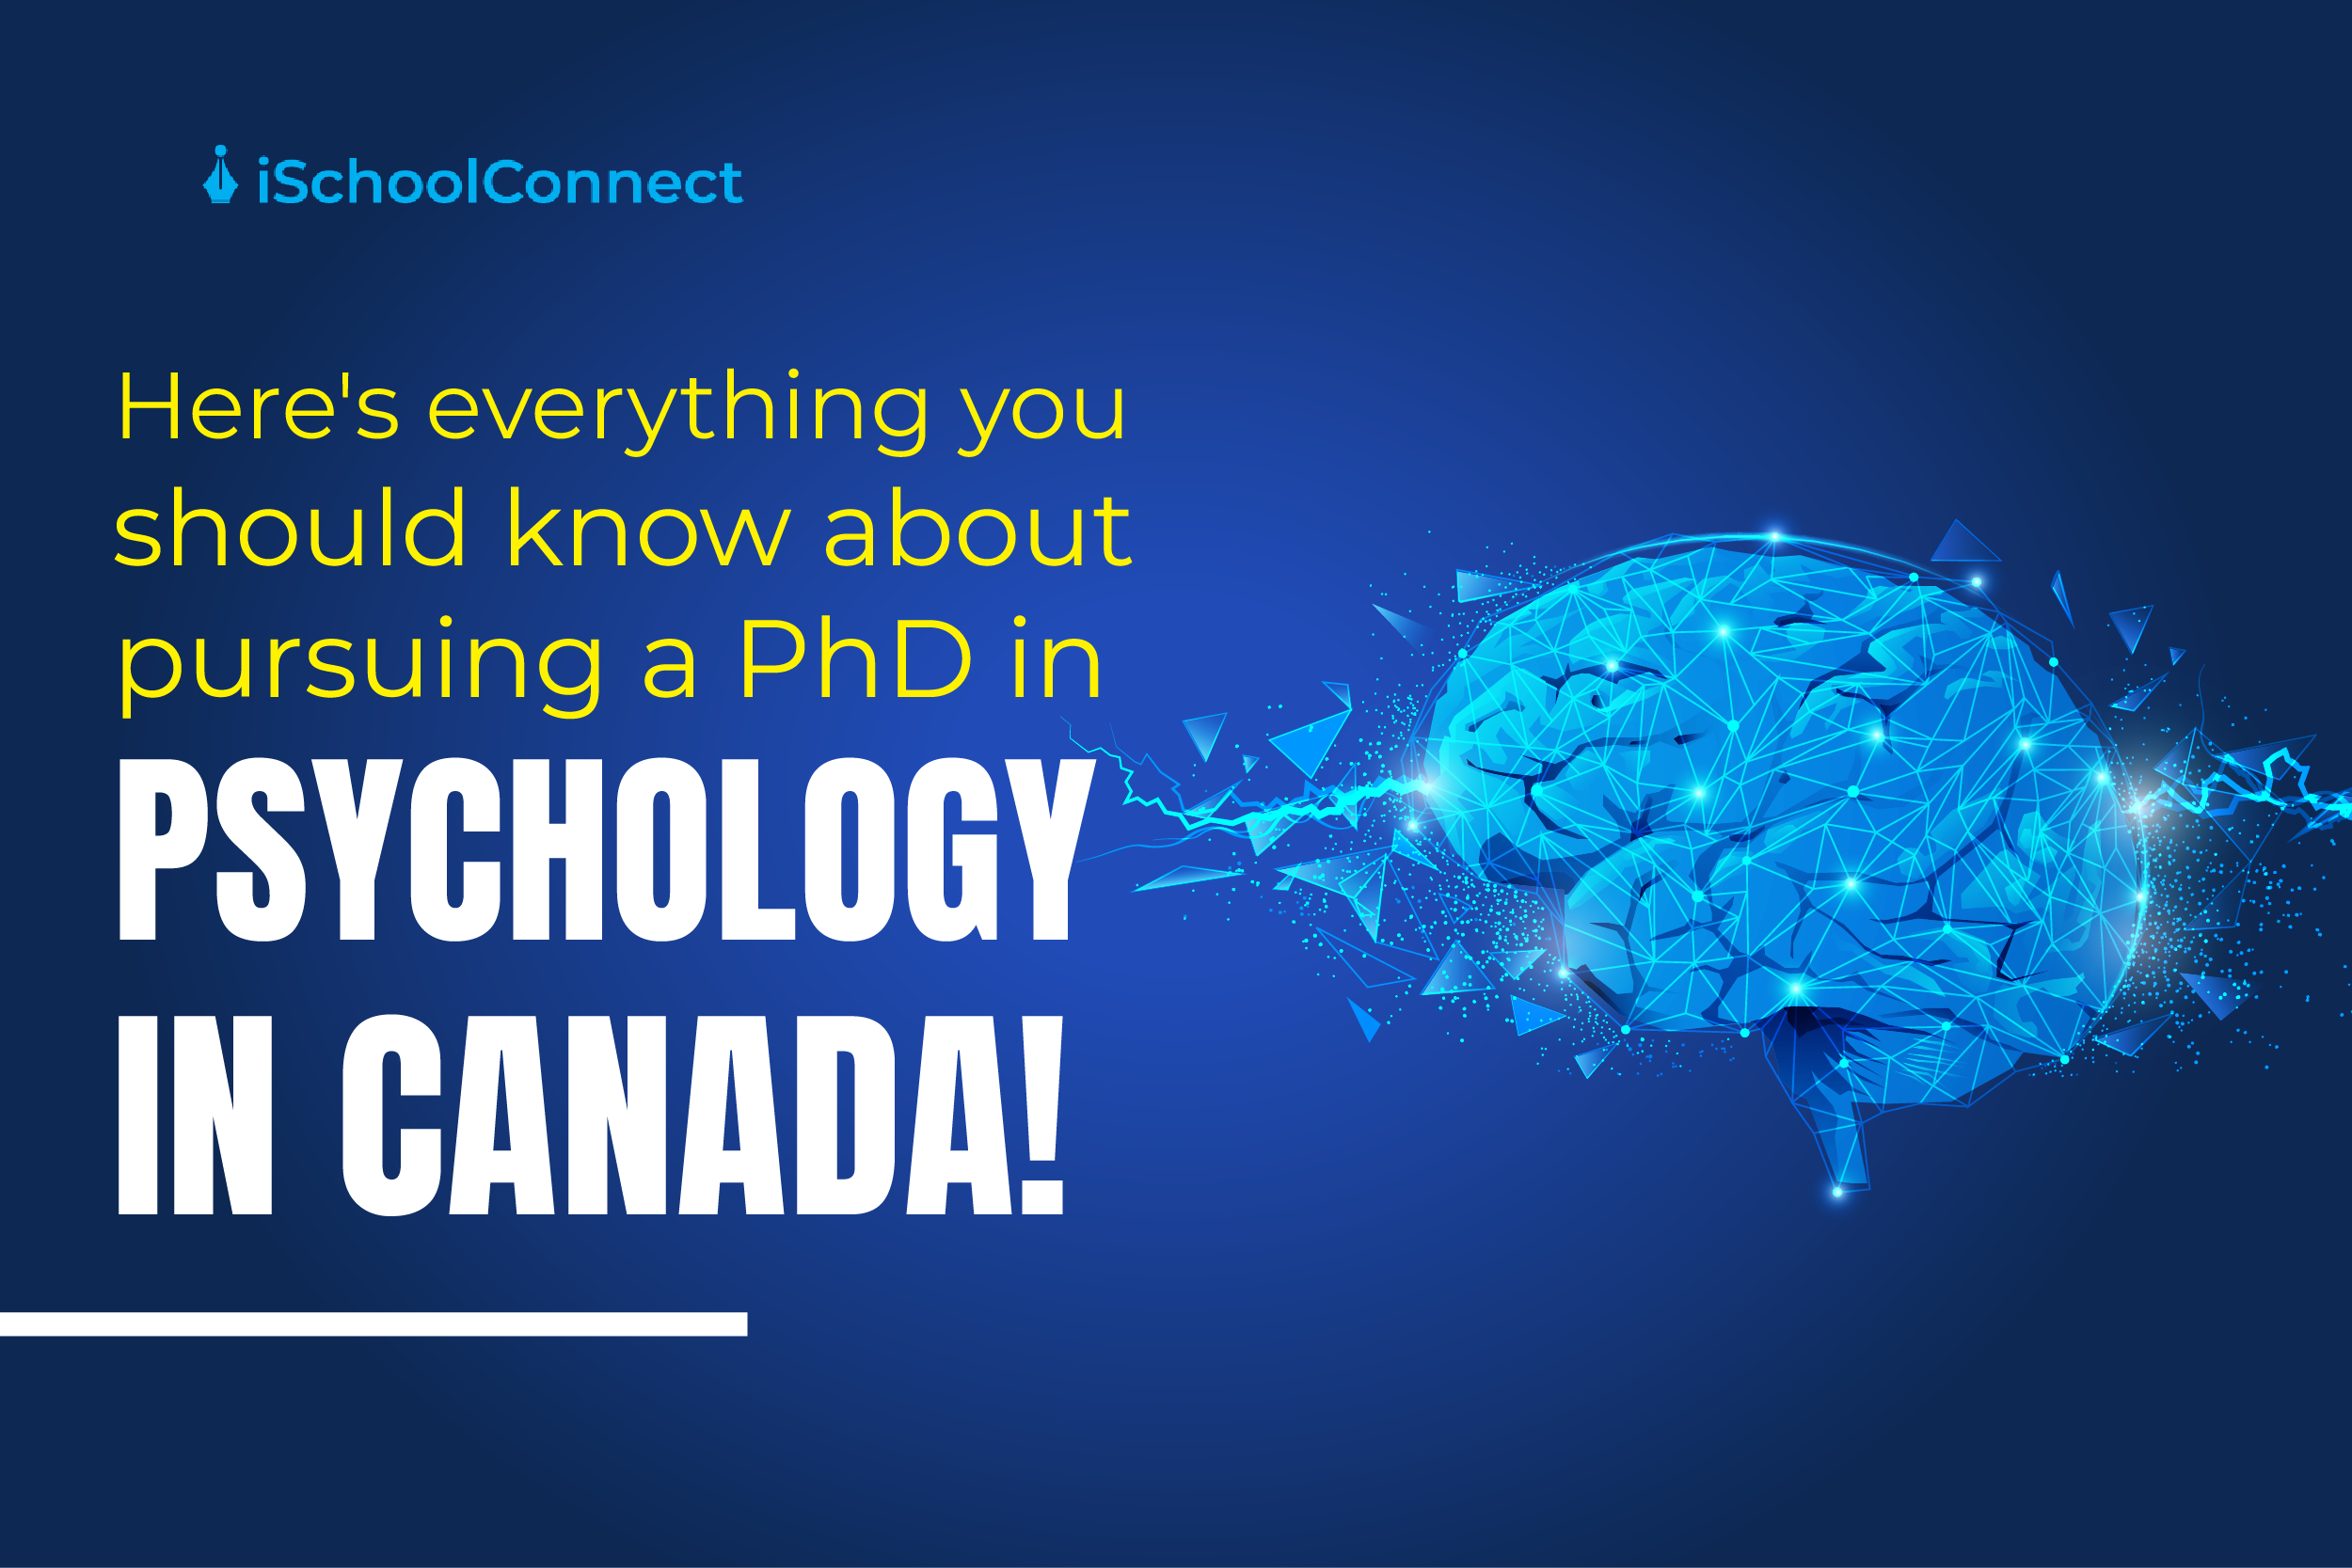 phd counseling psychology canada